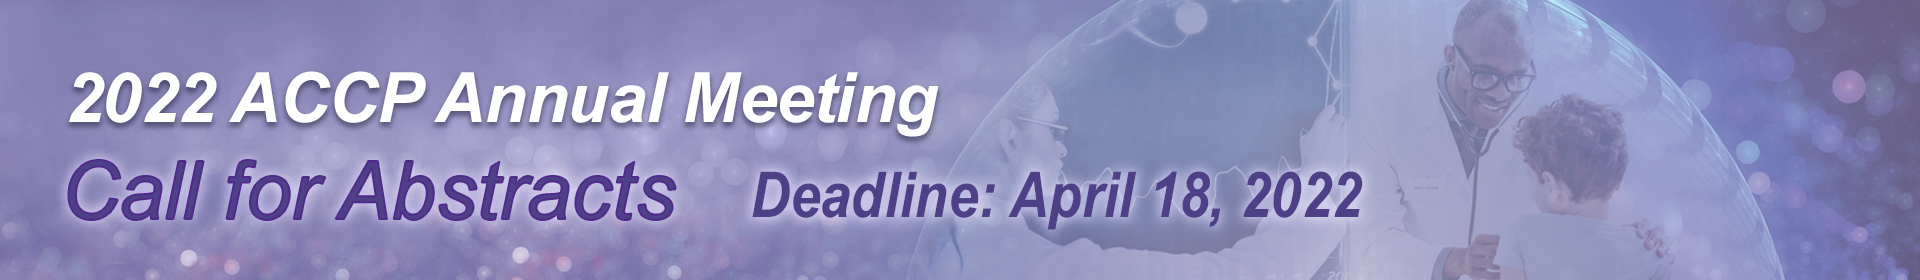 2022 ACCP Annual Meeting Call for Abstracts Banner